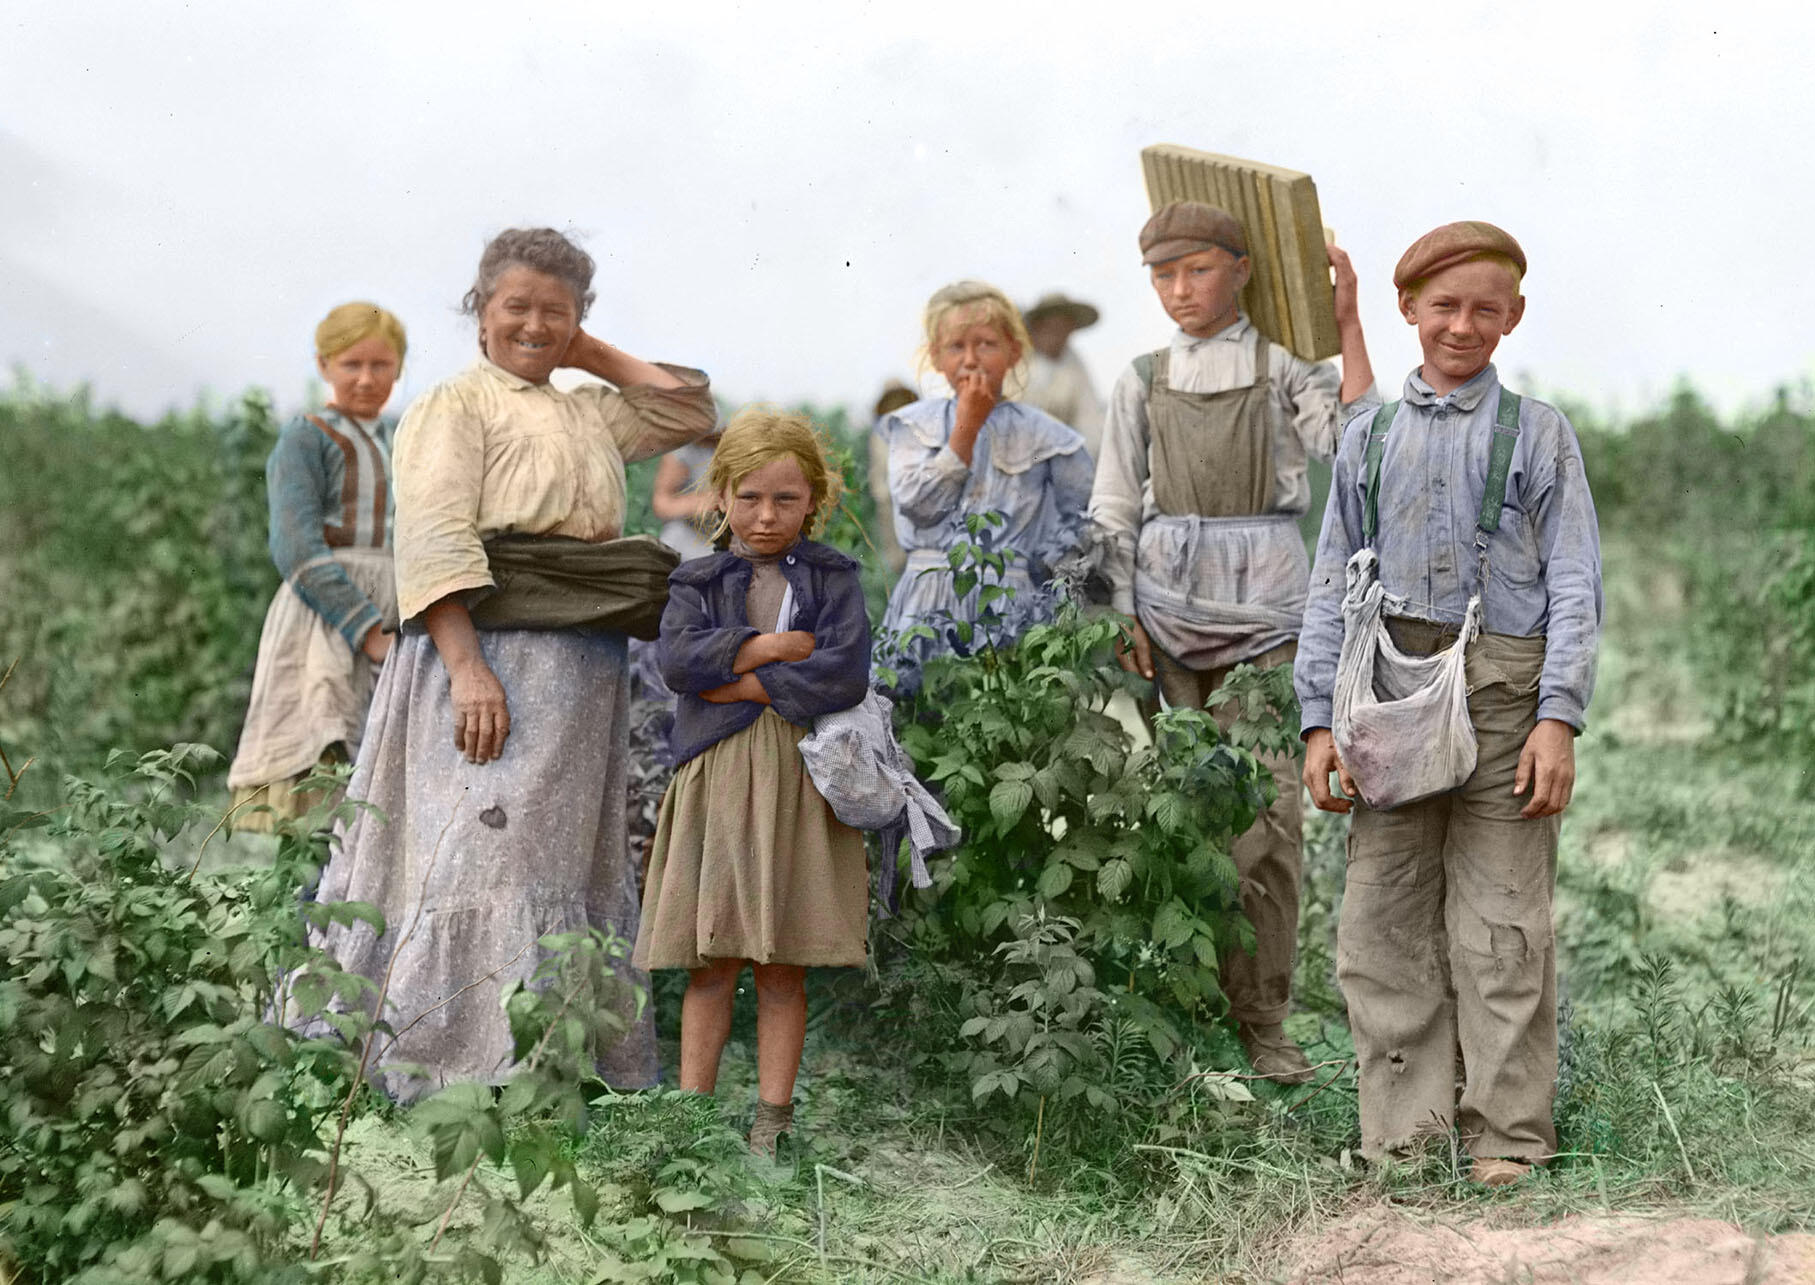 Earlier faces of immigration - a portrait of a family of Polish migrant berry pickers in Maryland in 1909. (Photo by Lewis Hine from Wikimedia Commons, colored by Robek.)